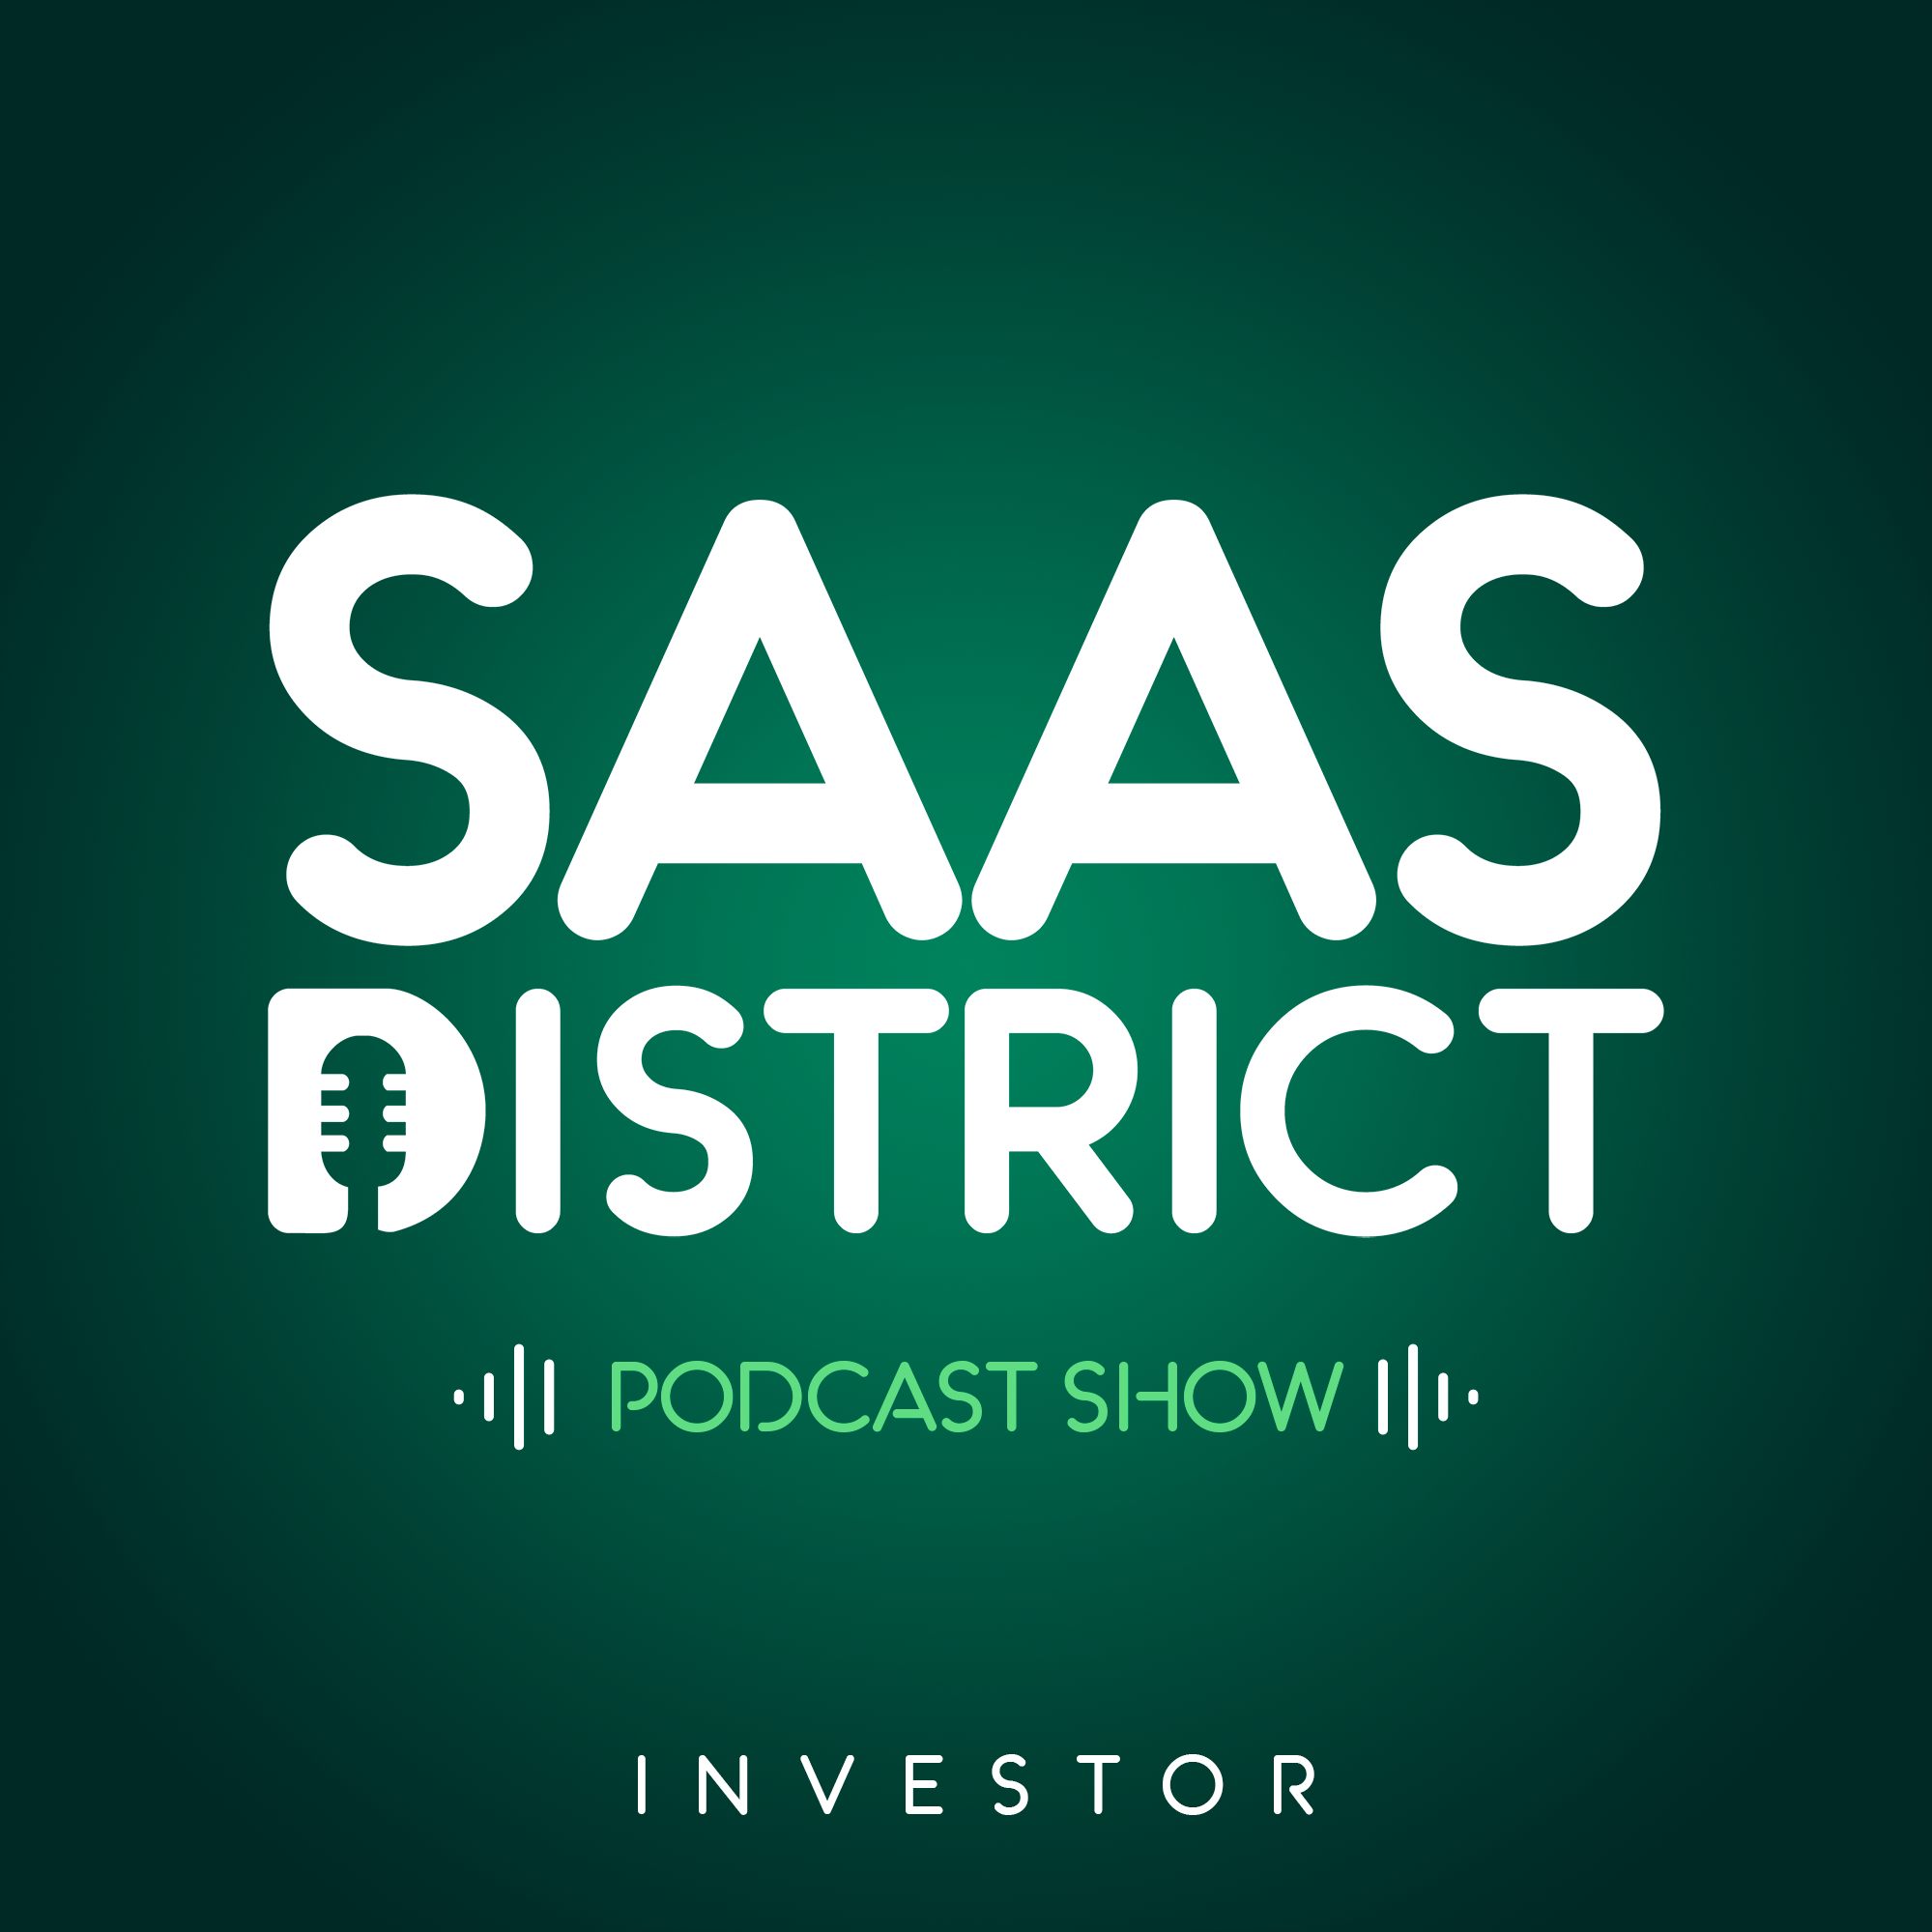 Artwork for podcast SaaS District